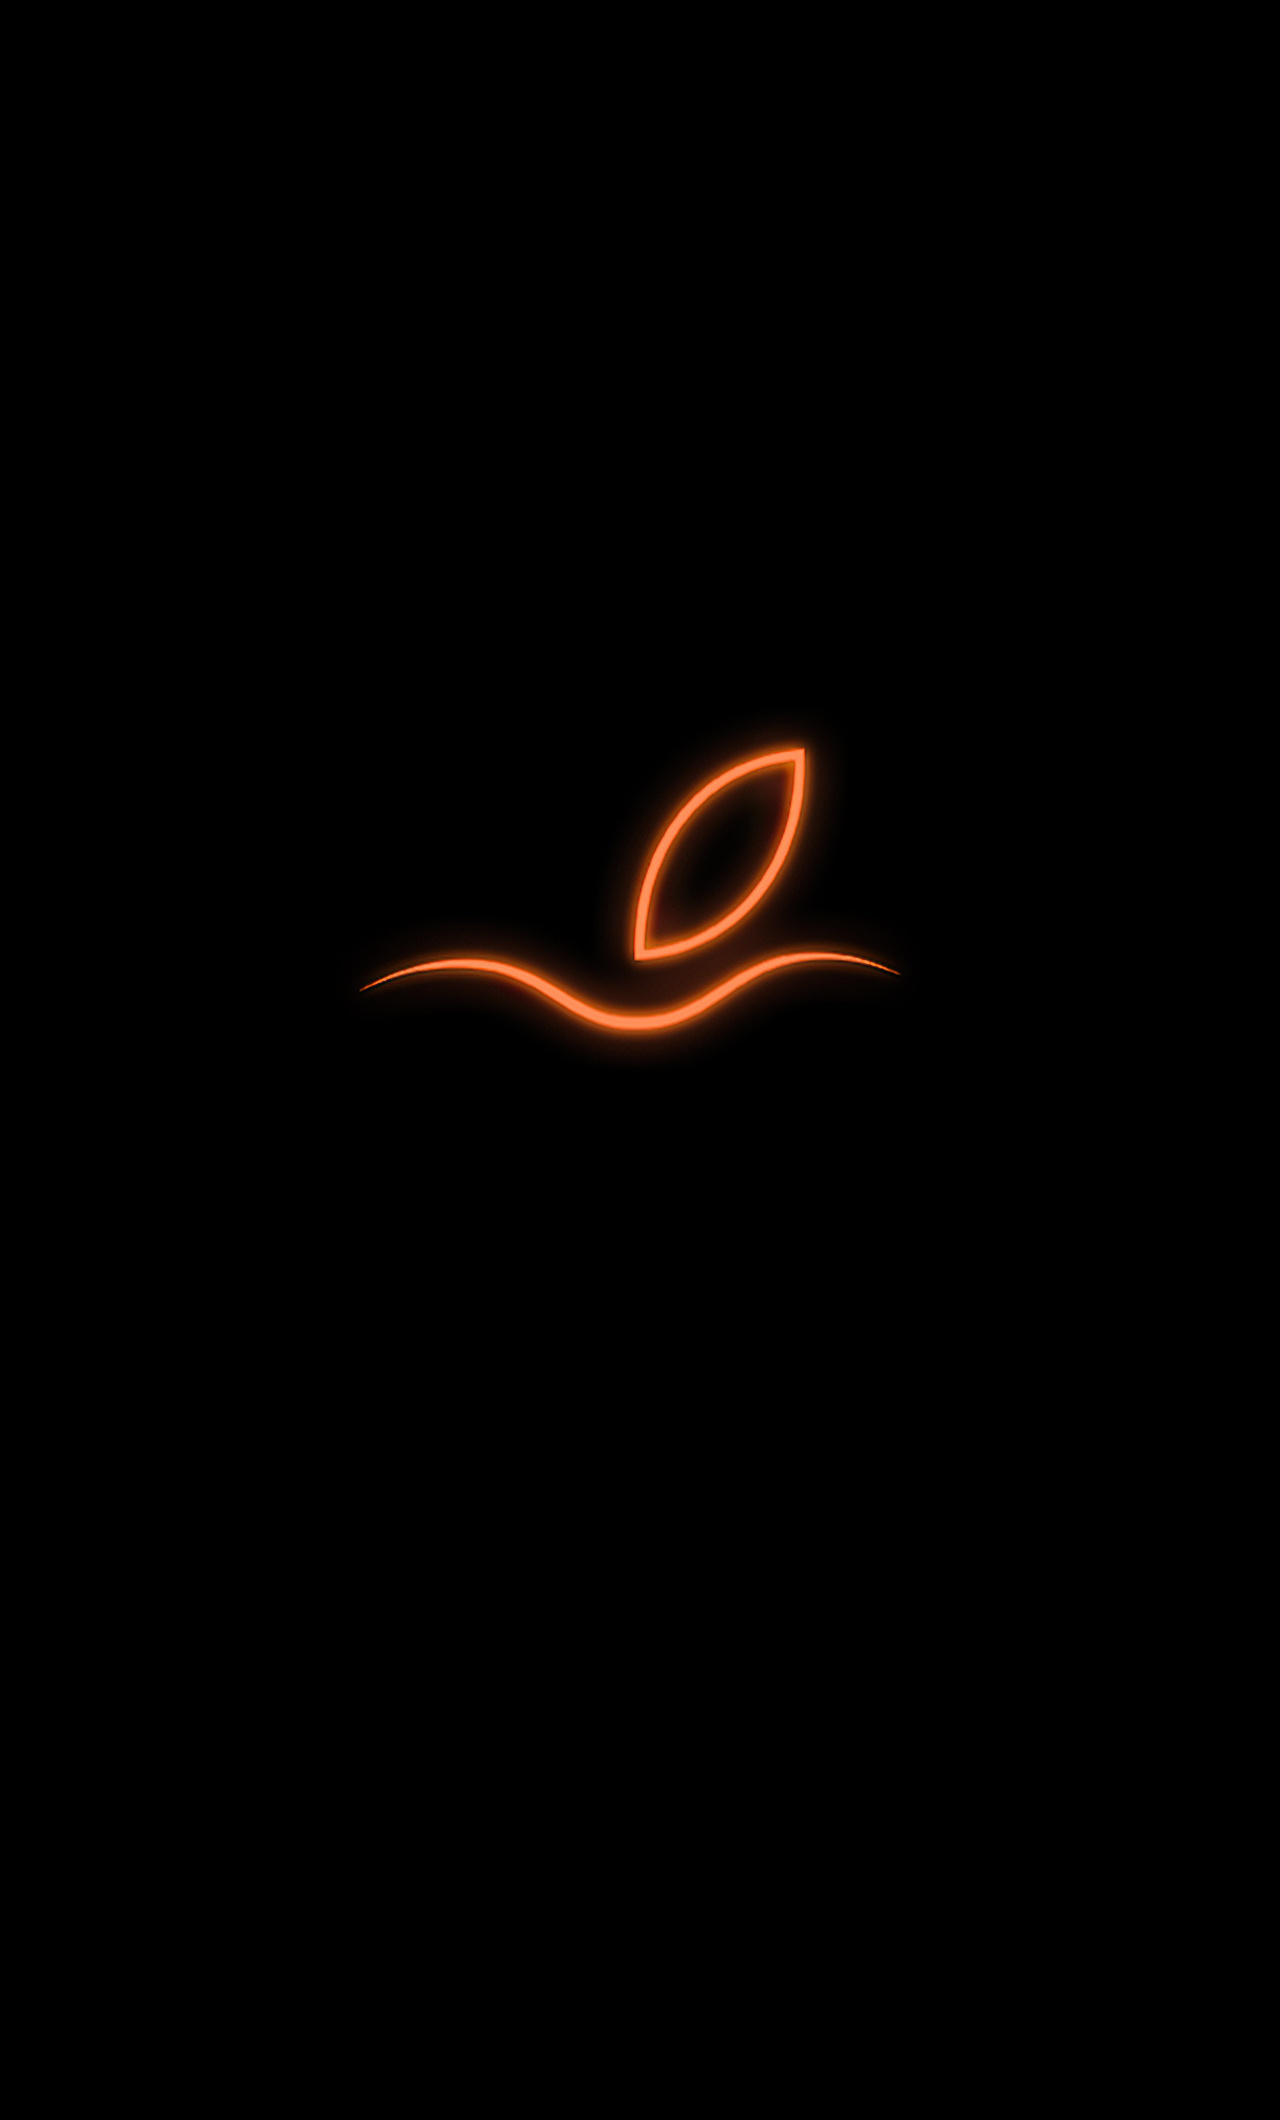 X glowing apple logo k iphone hd k wallpapers images backgrounds photos and pictures